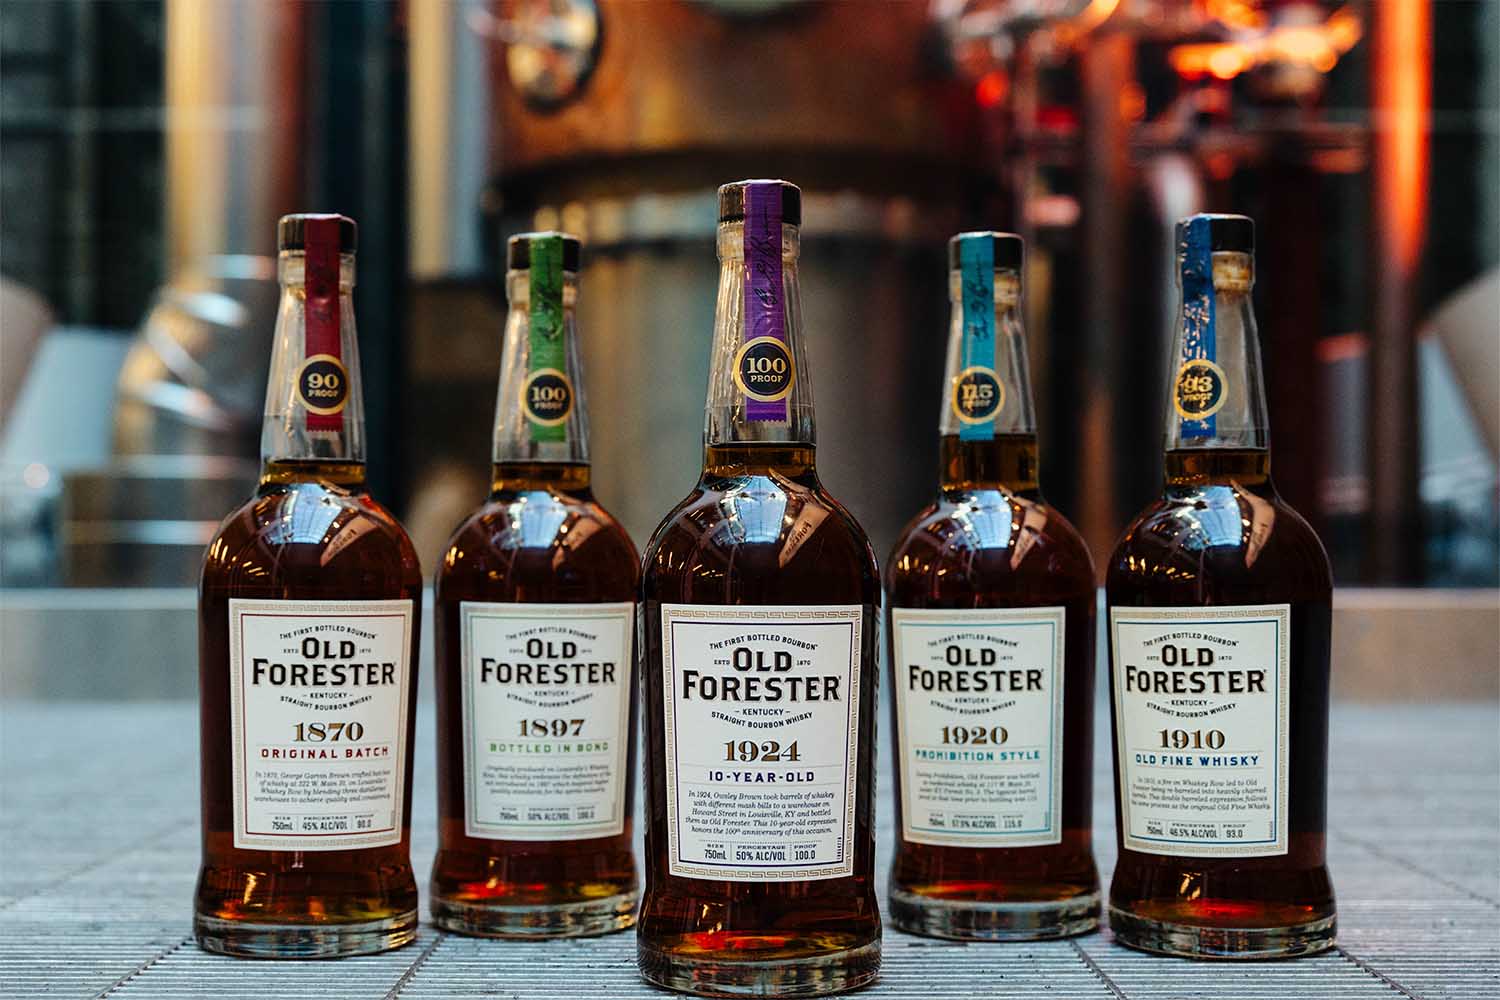 Whiskey Row lineup from Old Forester